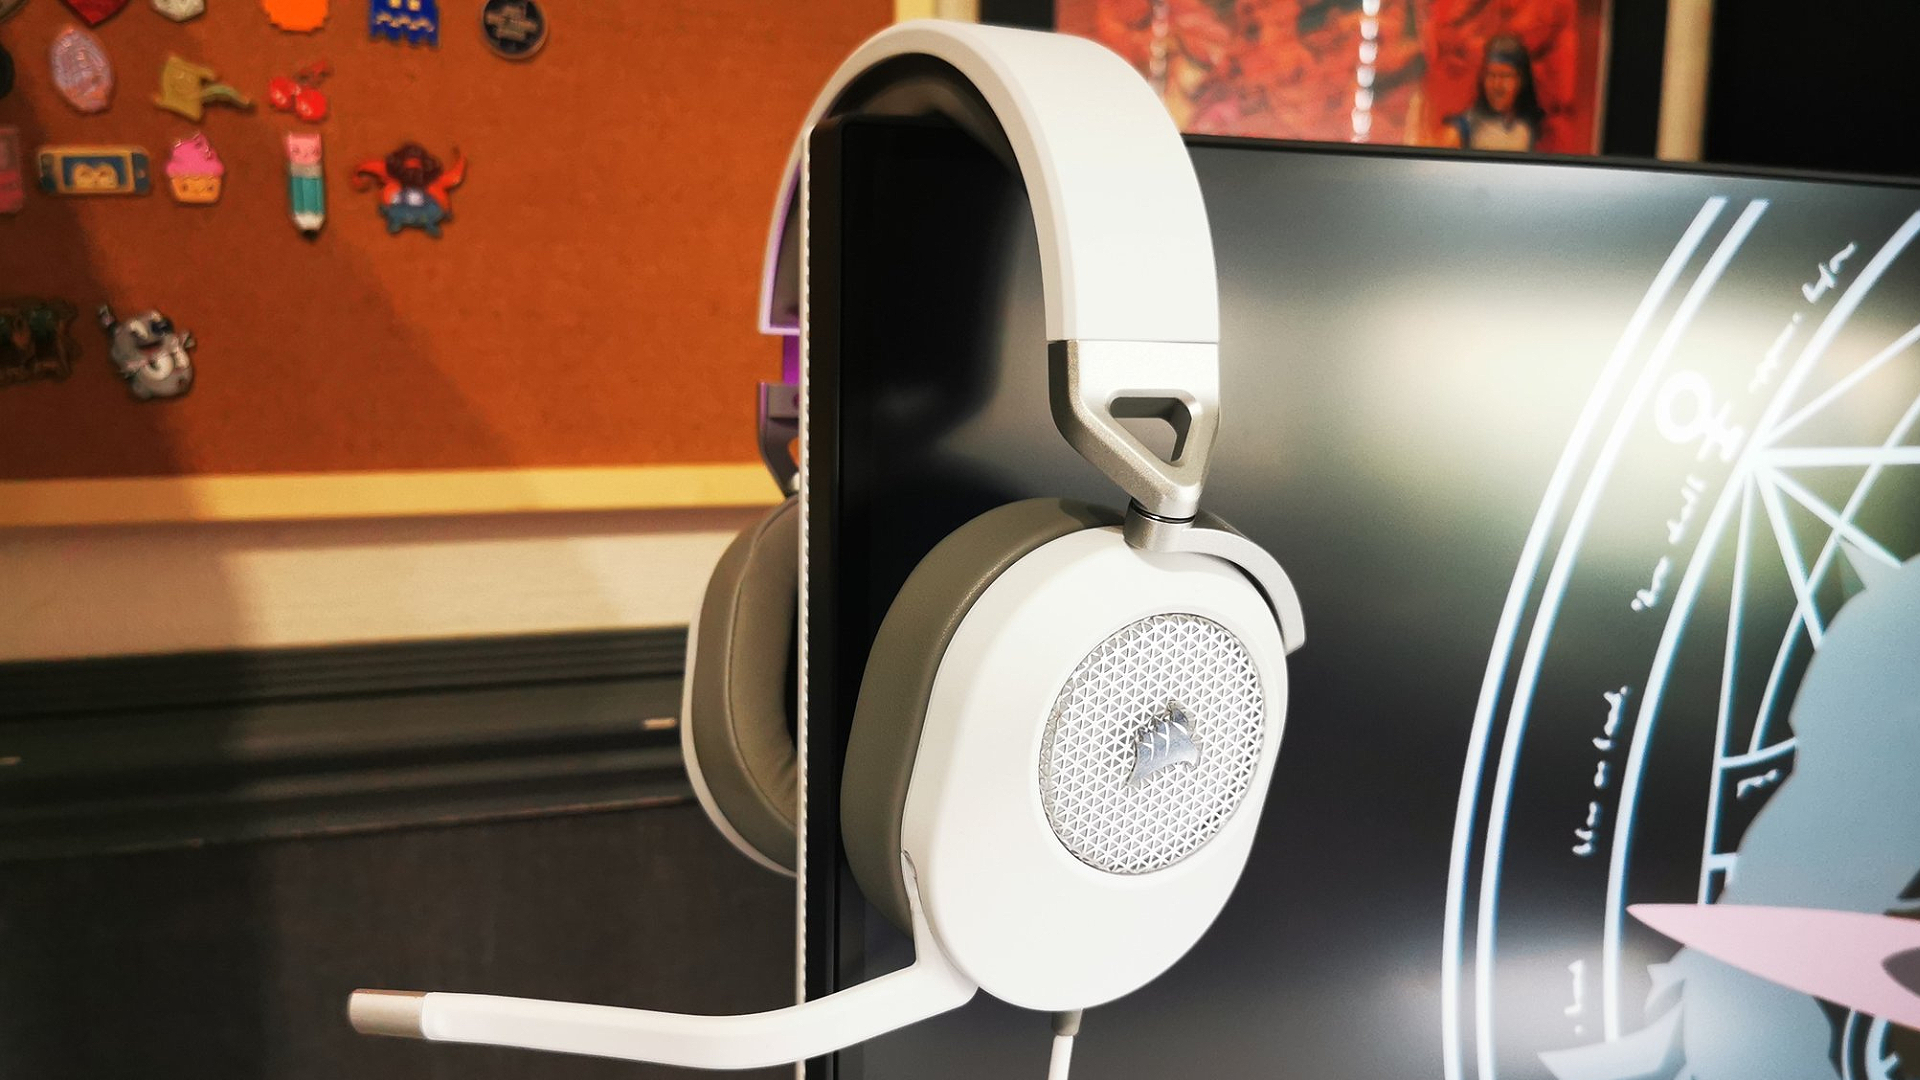 Corsair HS65 Surround review – a fantastic gaming headset under $100